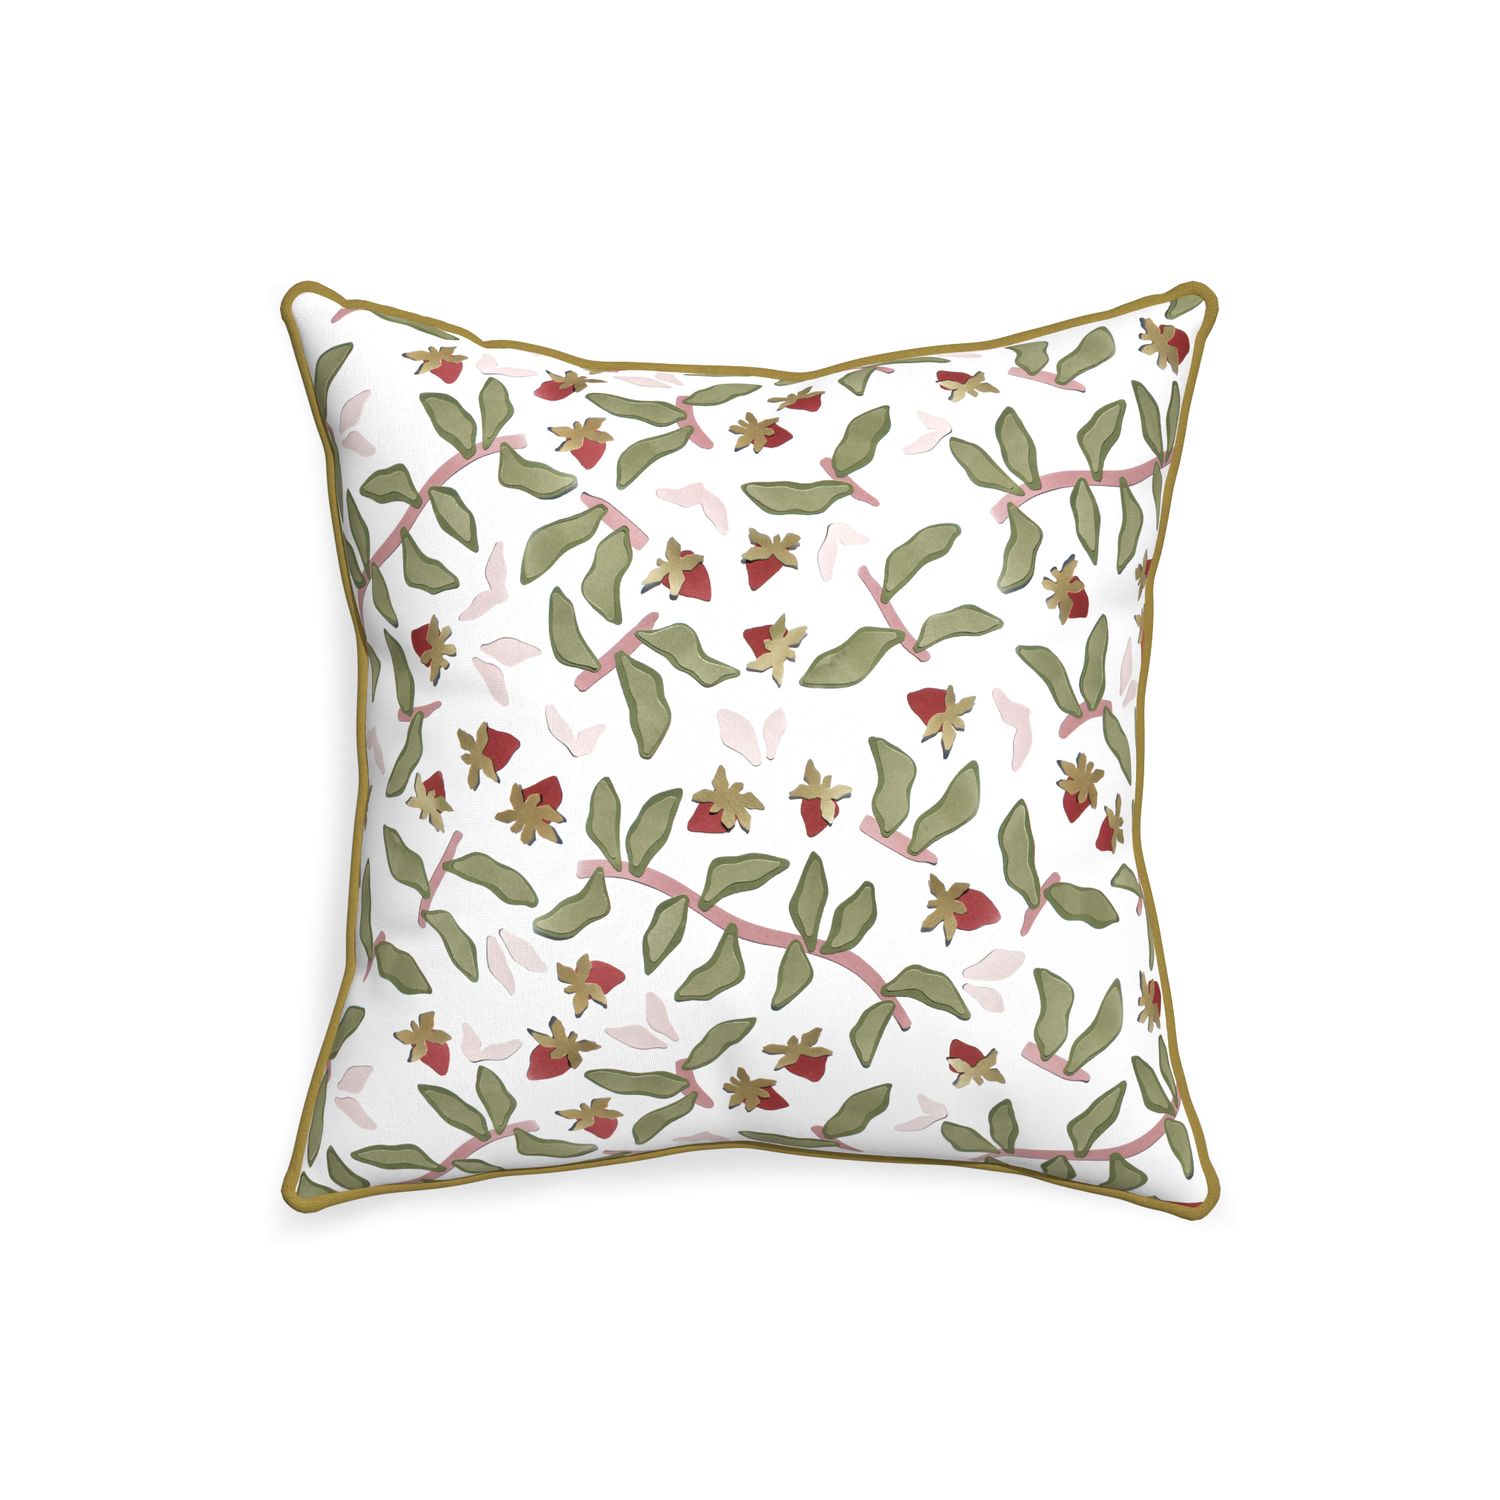 20-square nellie custom strawberry & botanicalpillow with c piping on white background